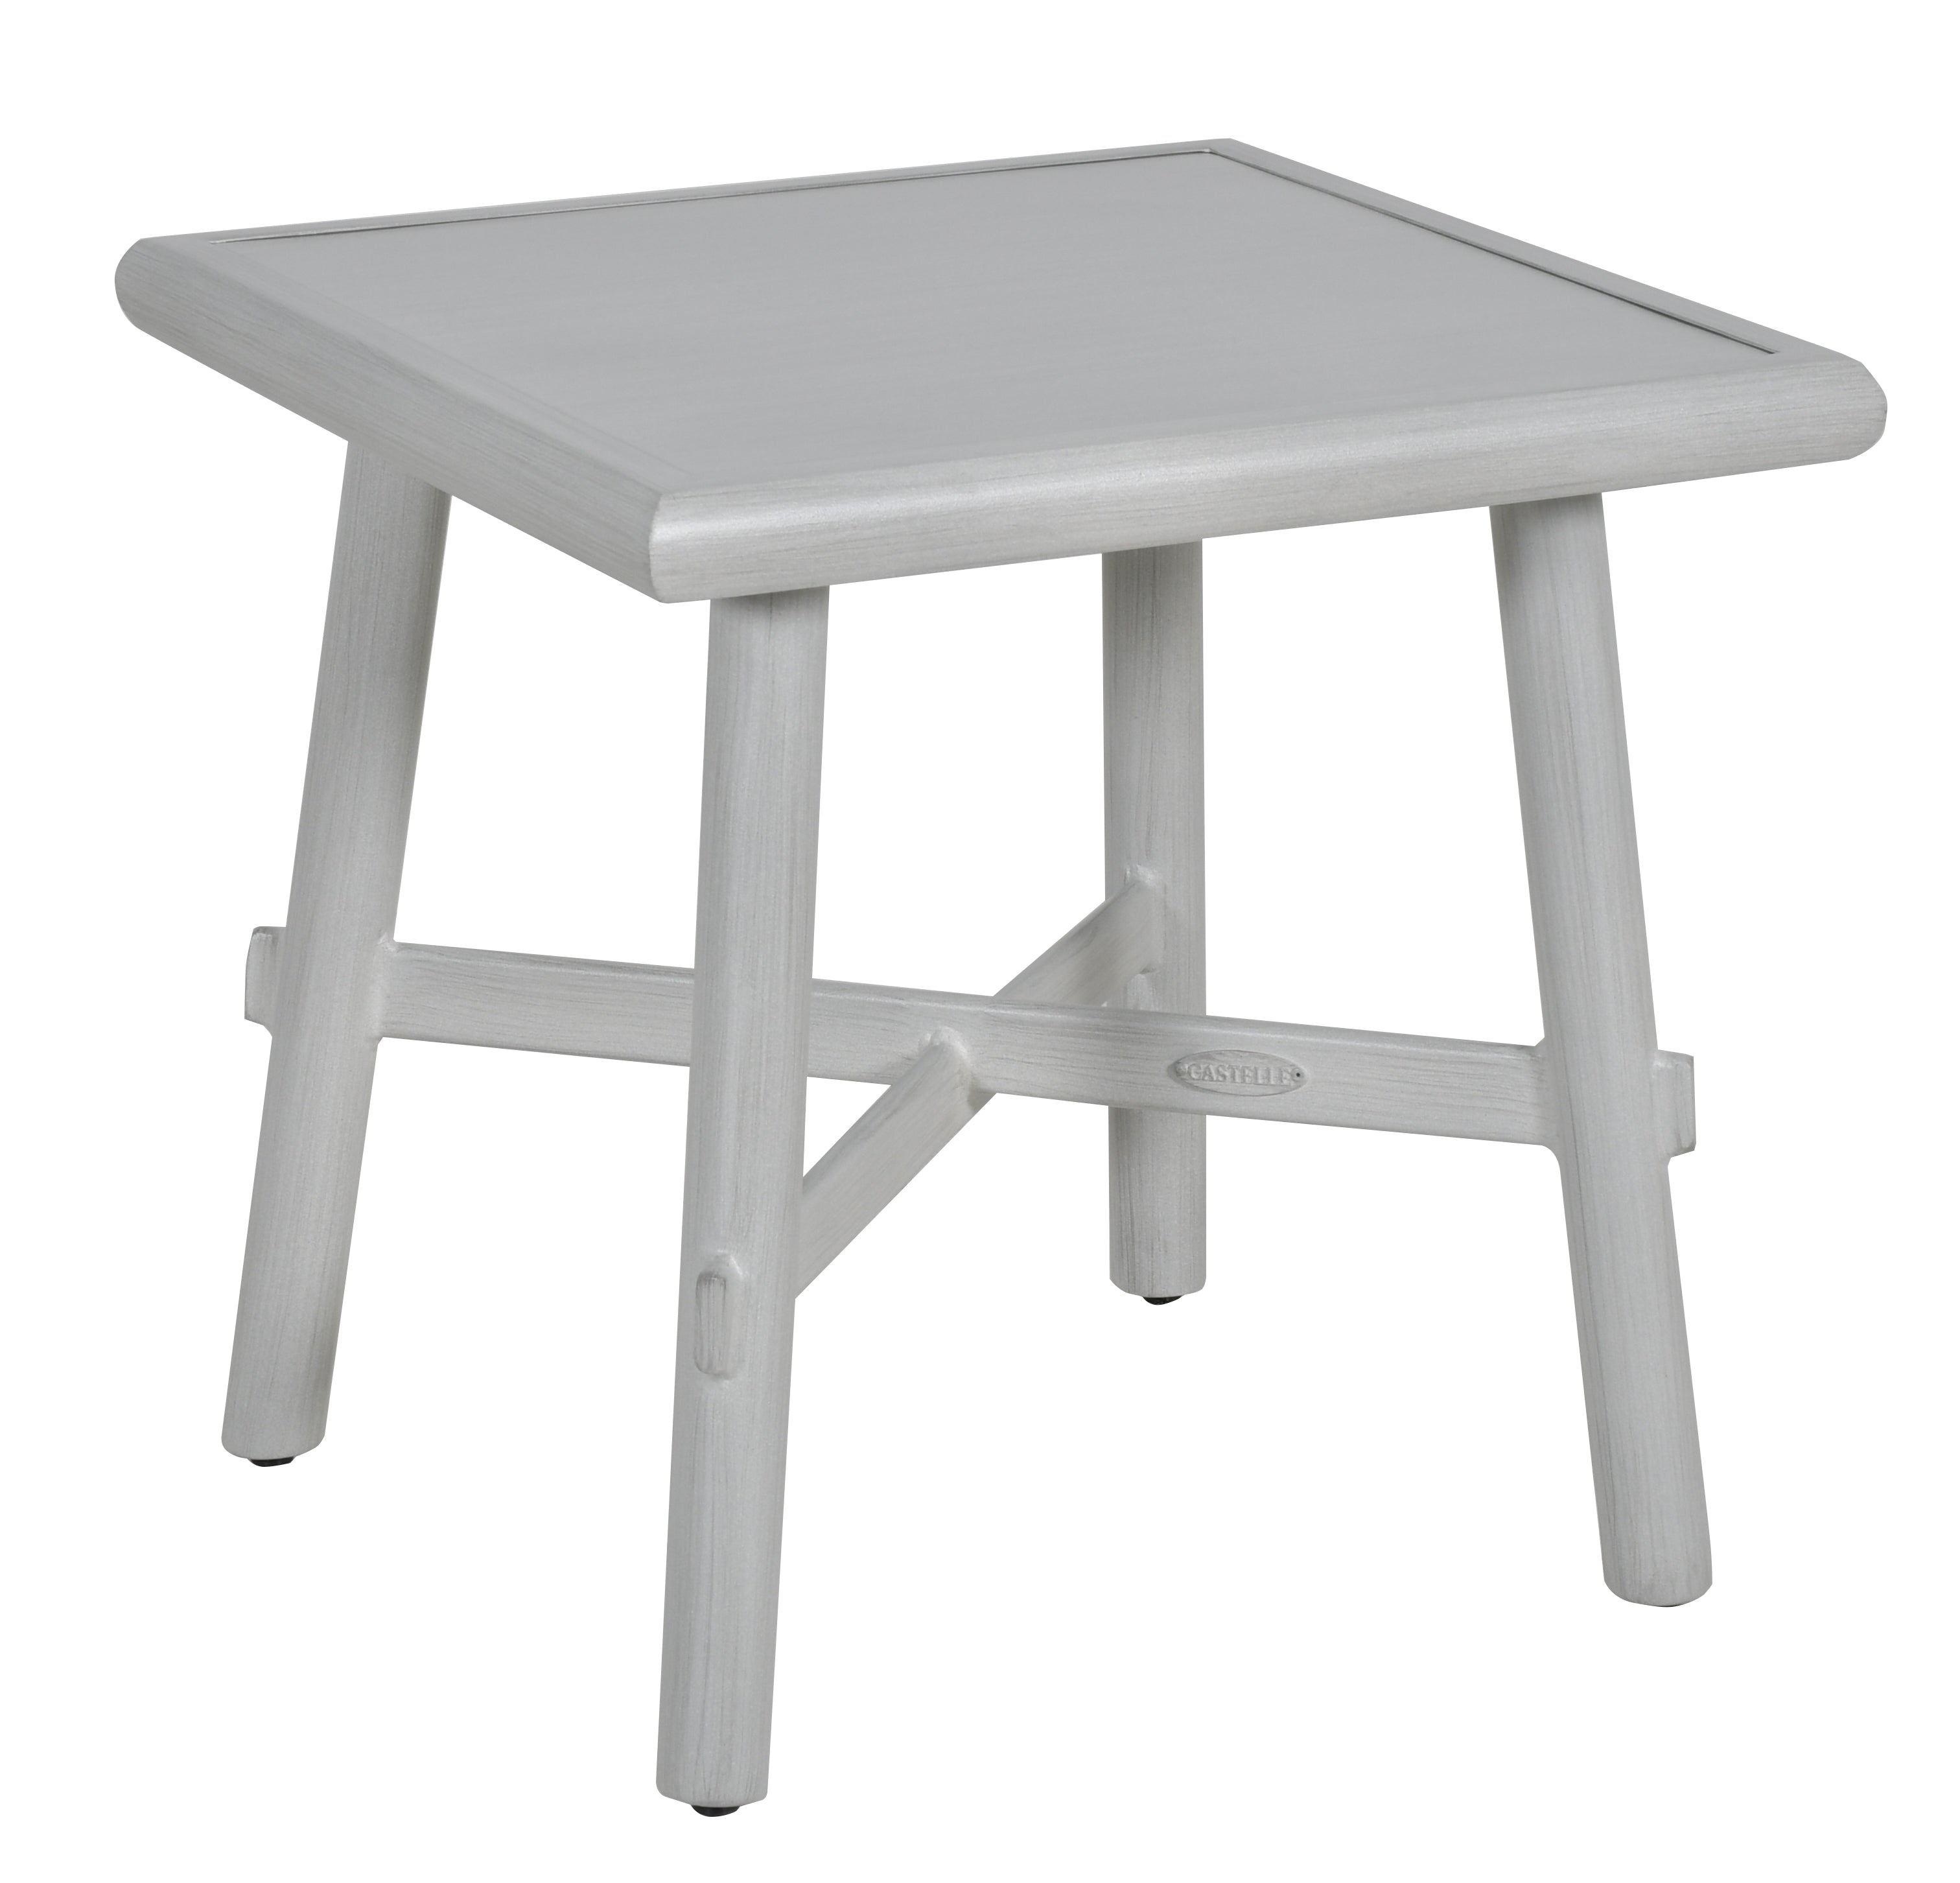 Barbados 22" Square Side Table By Castelle